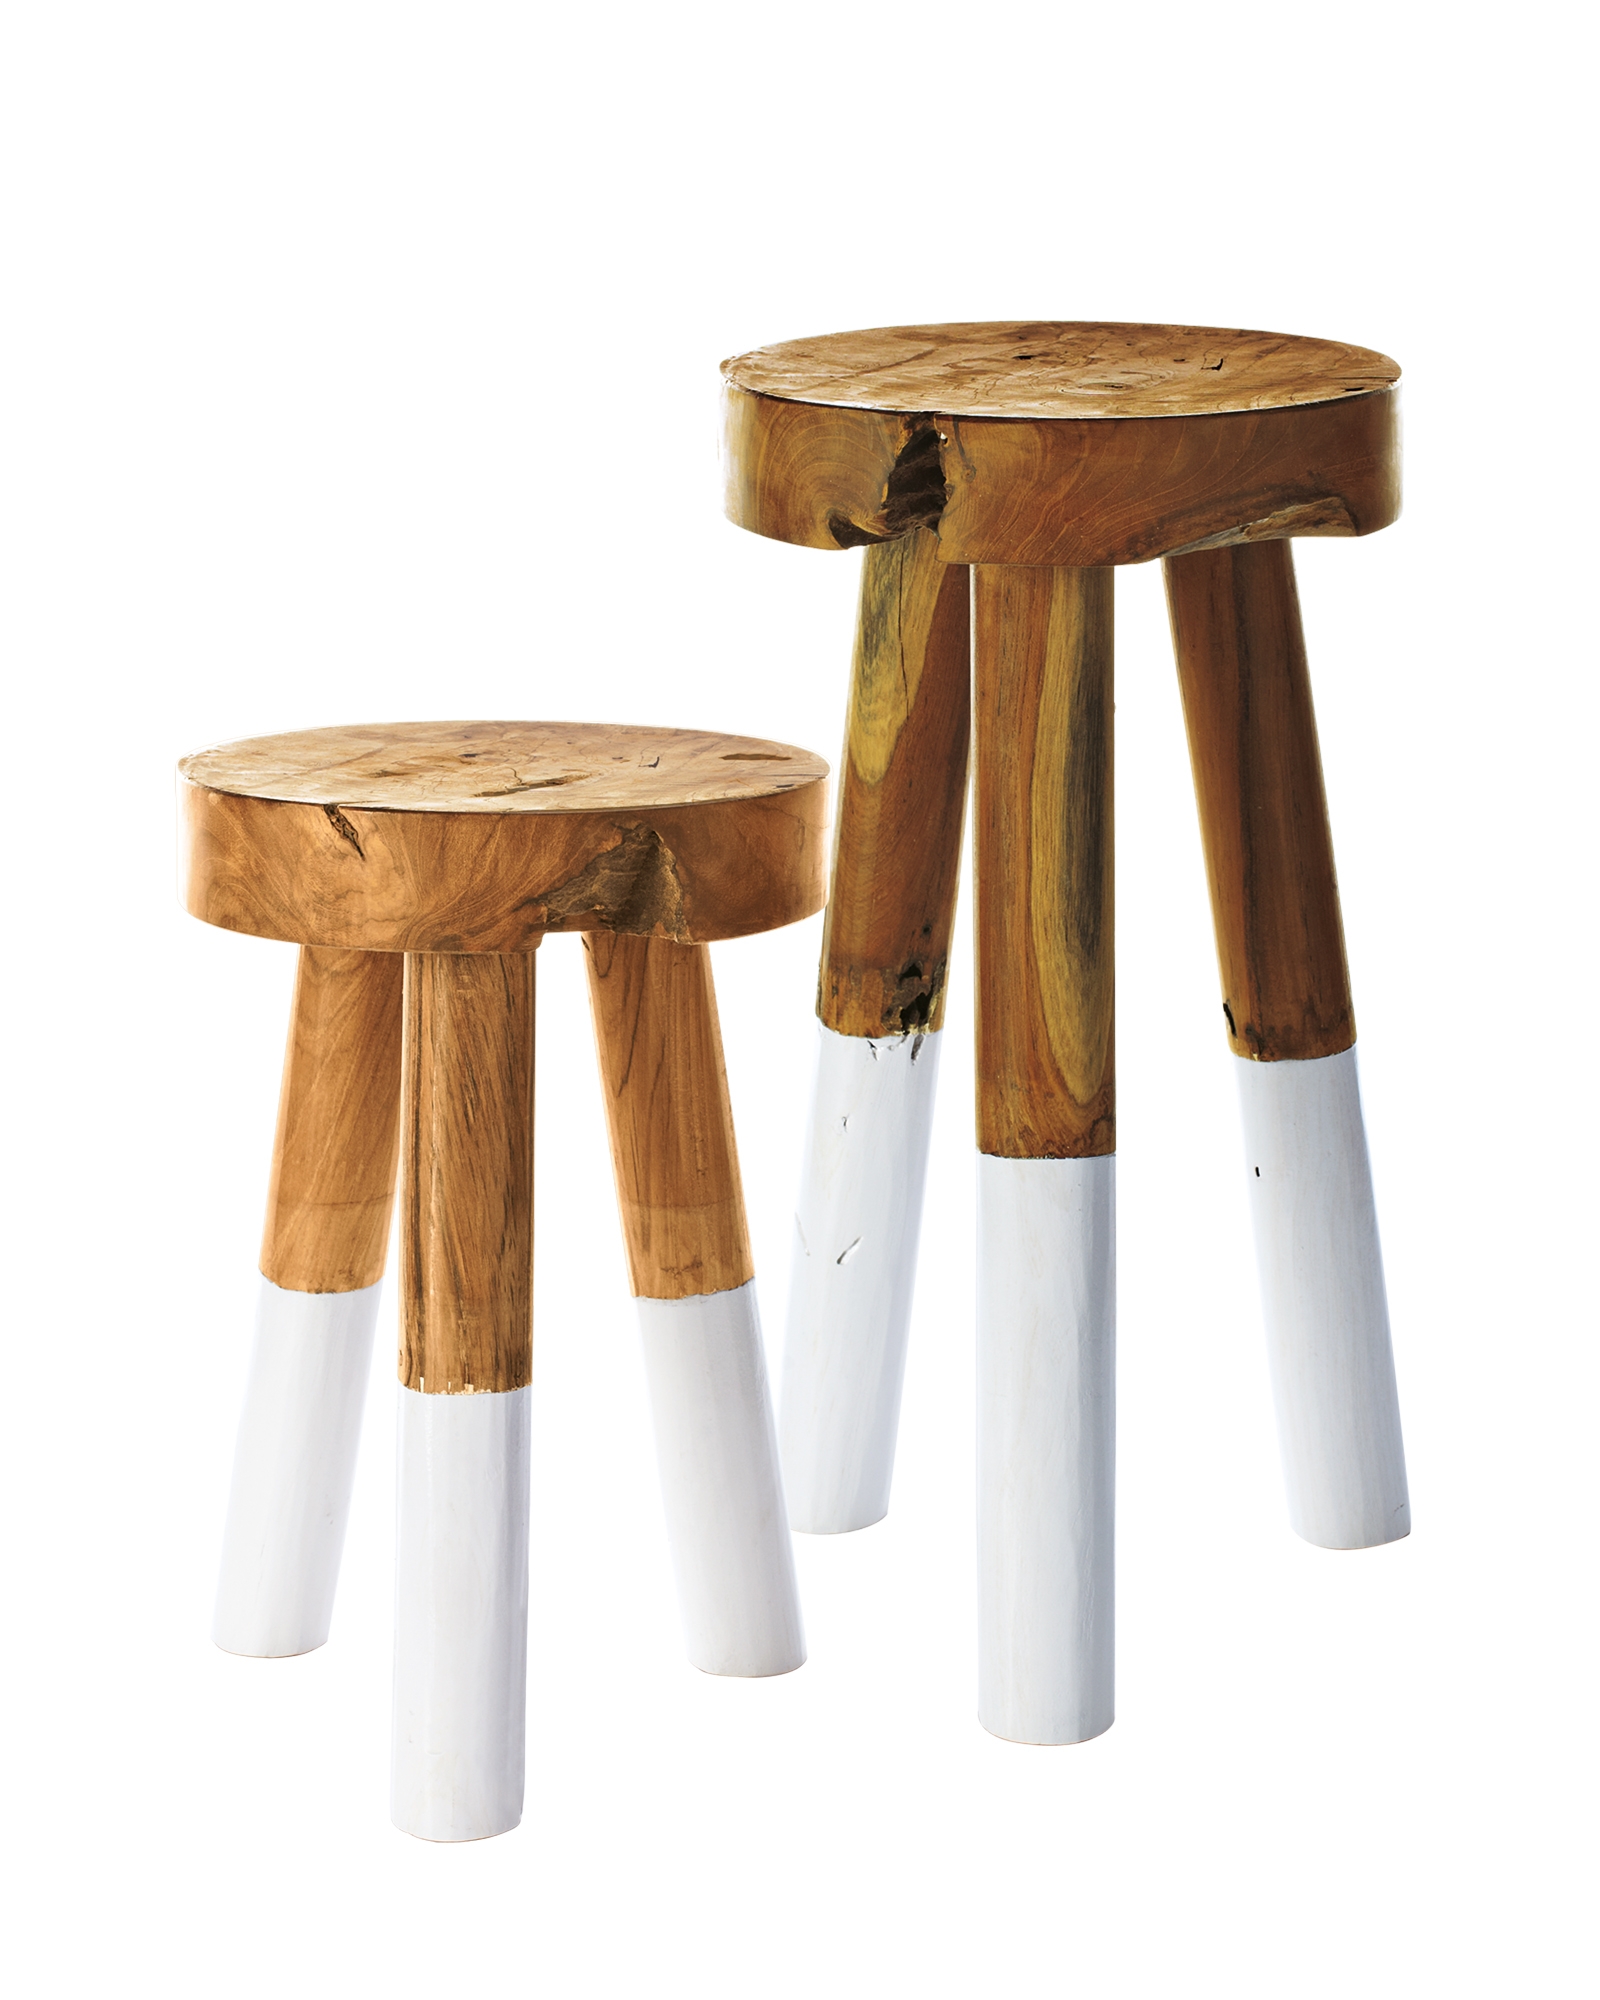 DipDyed Stool - Small - Image 1